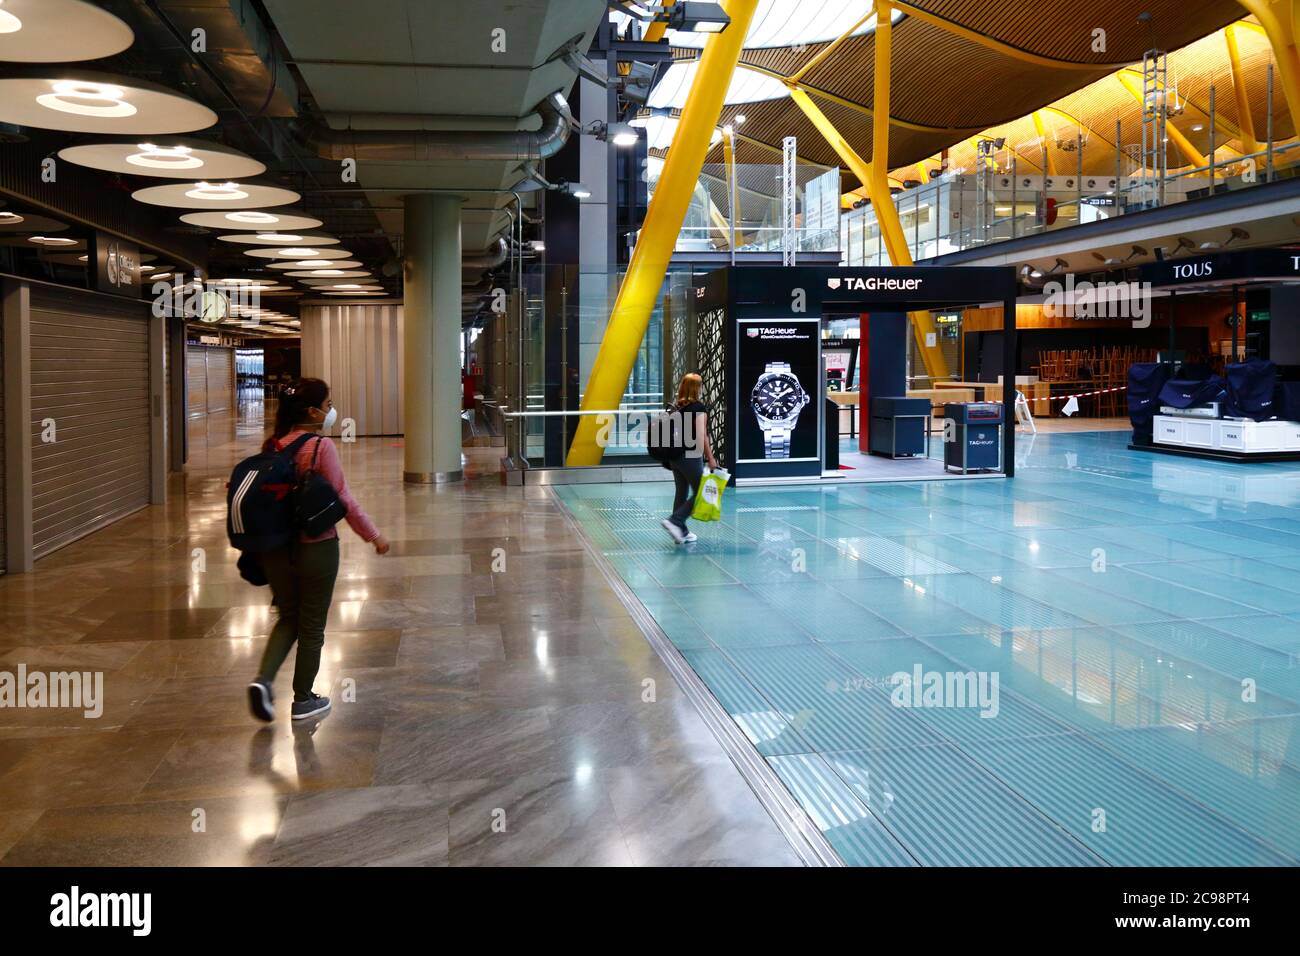 28th July 2020, Barajas Airport, Madrid, Spain: Passengers walk through the near empy departure lounge area of the Terminal 4S building of Barajas Airport. Reduced numbers of flights are now operating between European countries after the lockdown to control the covid-19 coronavirus, and governments have put a system of air bridges in place to facilitate travel and tourism. Spain has seen a number of new outbreaks in recent days, prompting the UK government to announce that people returning to the UK from Spain should quarantine for 14 days on arrival. Stock Photo